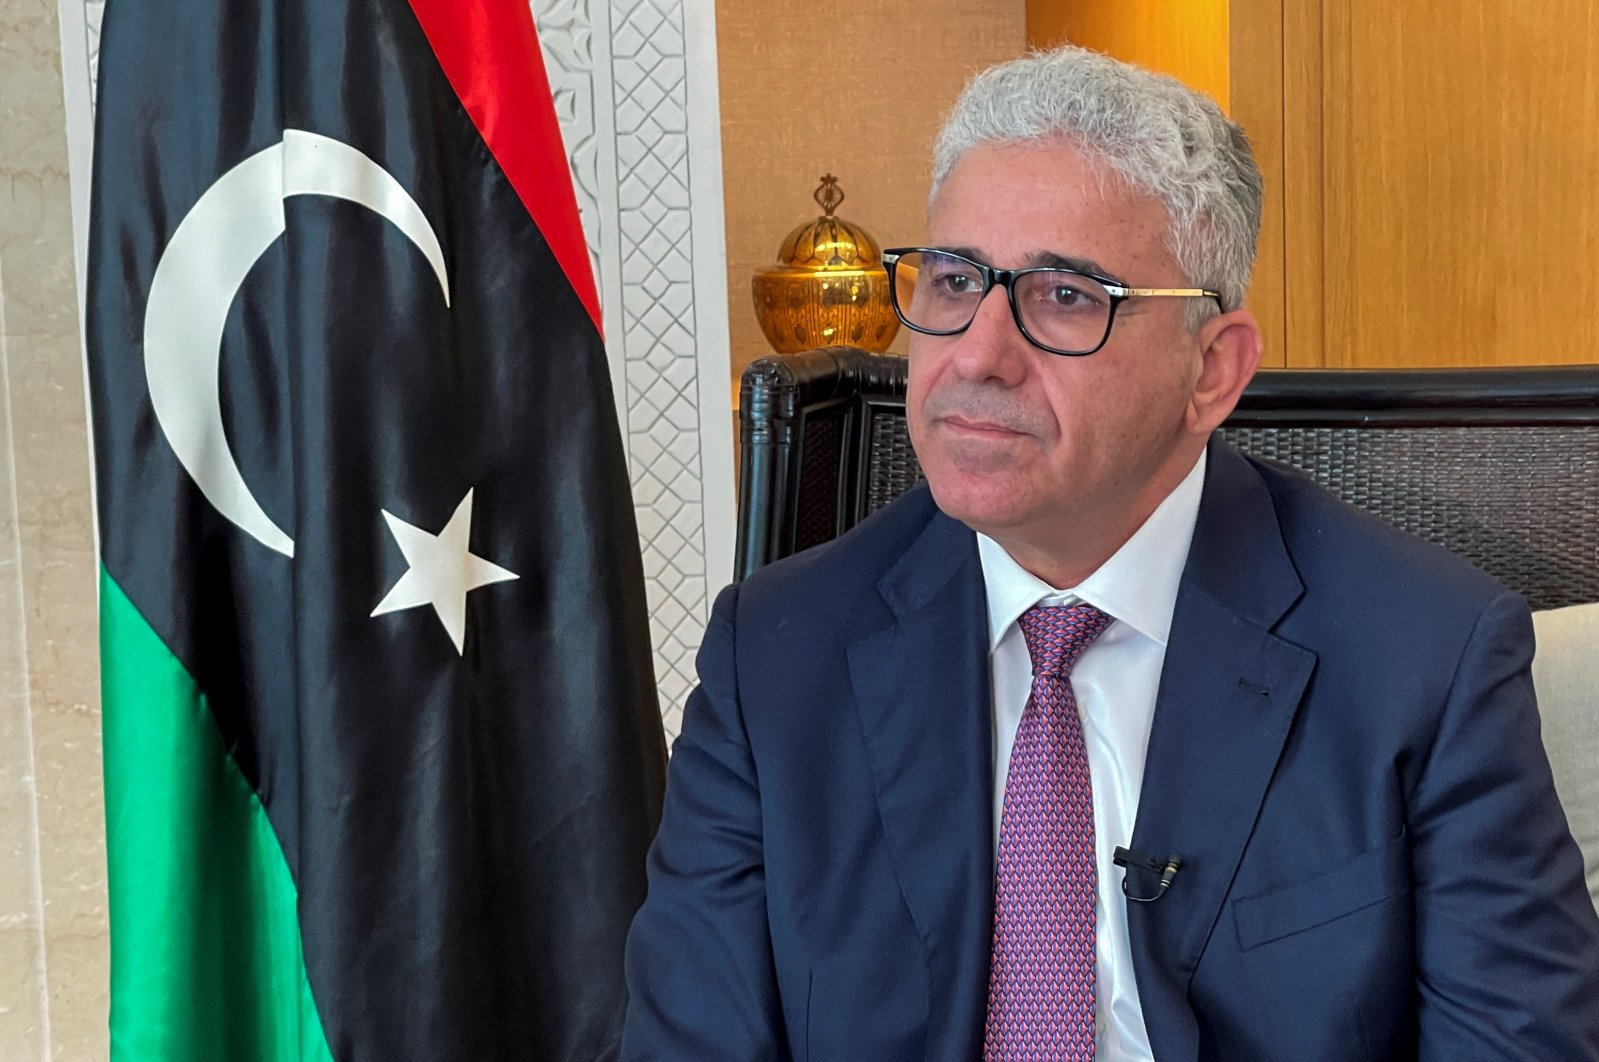 Libya&#039;s Fathi Bashagha, who was appointed prime minister by the eastern-based parliament this month, looks on during an interview with Reuters in Tunis, Tunisia March 30, 2022. Picture taken March 30, 2022. REUTERS/Jihed Abidellaoui/File Photo